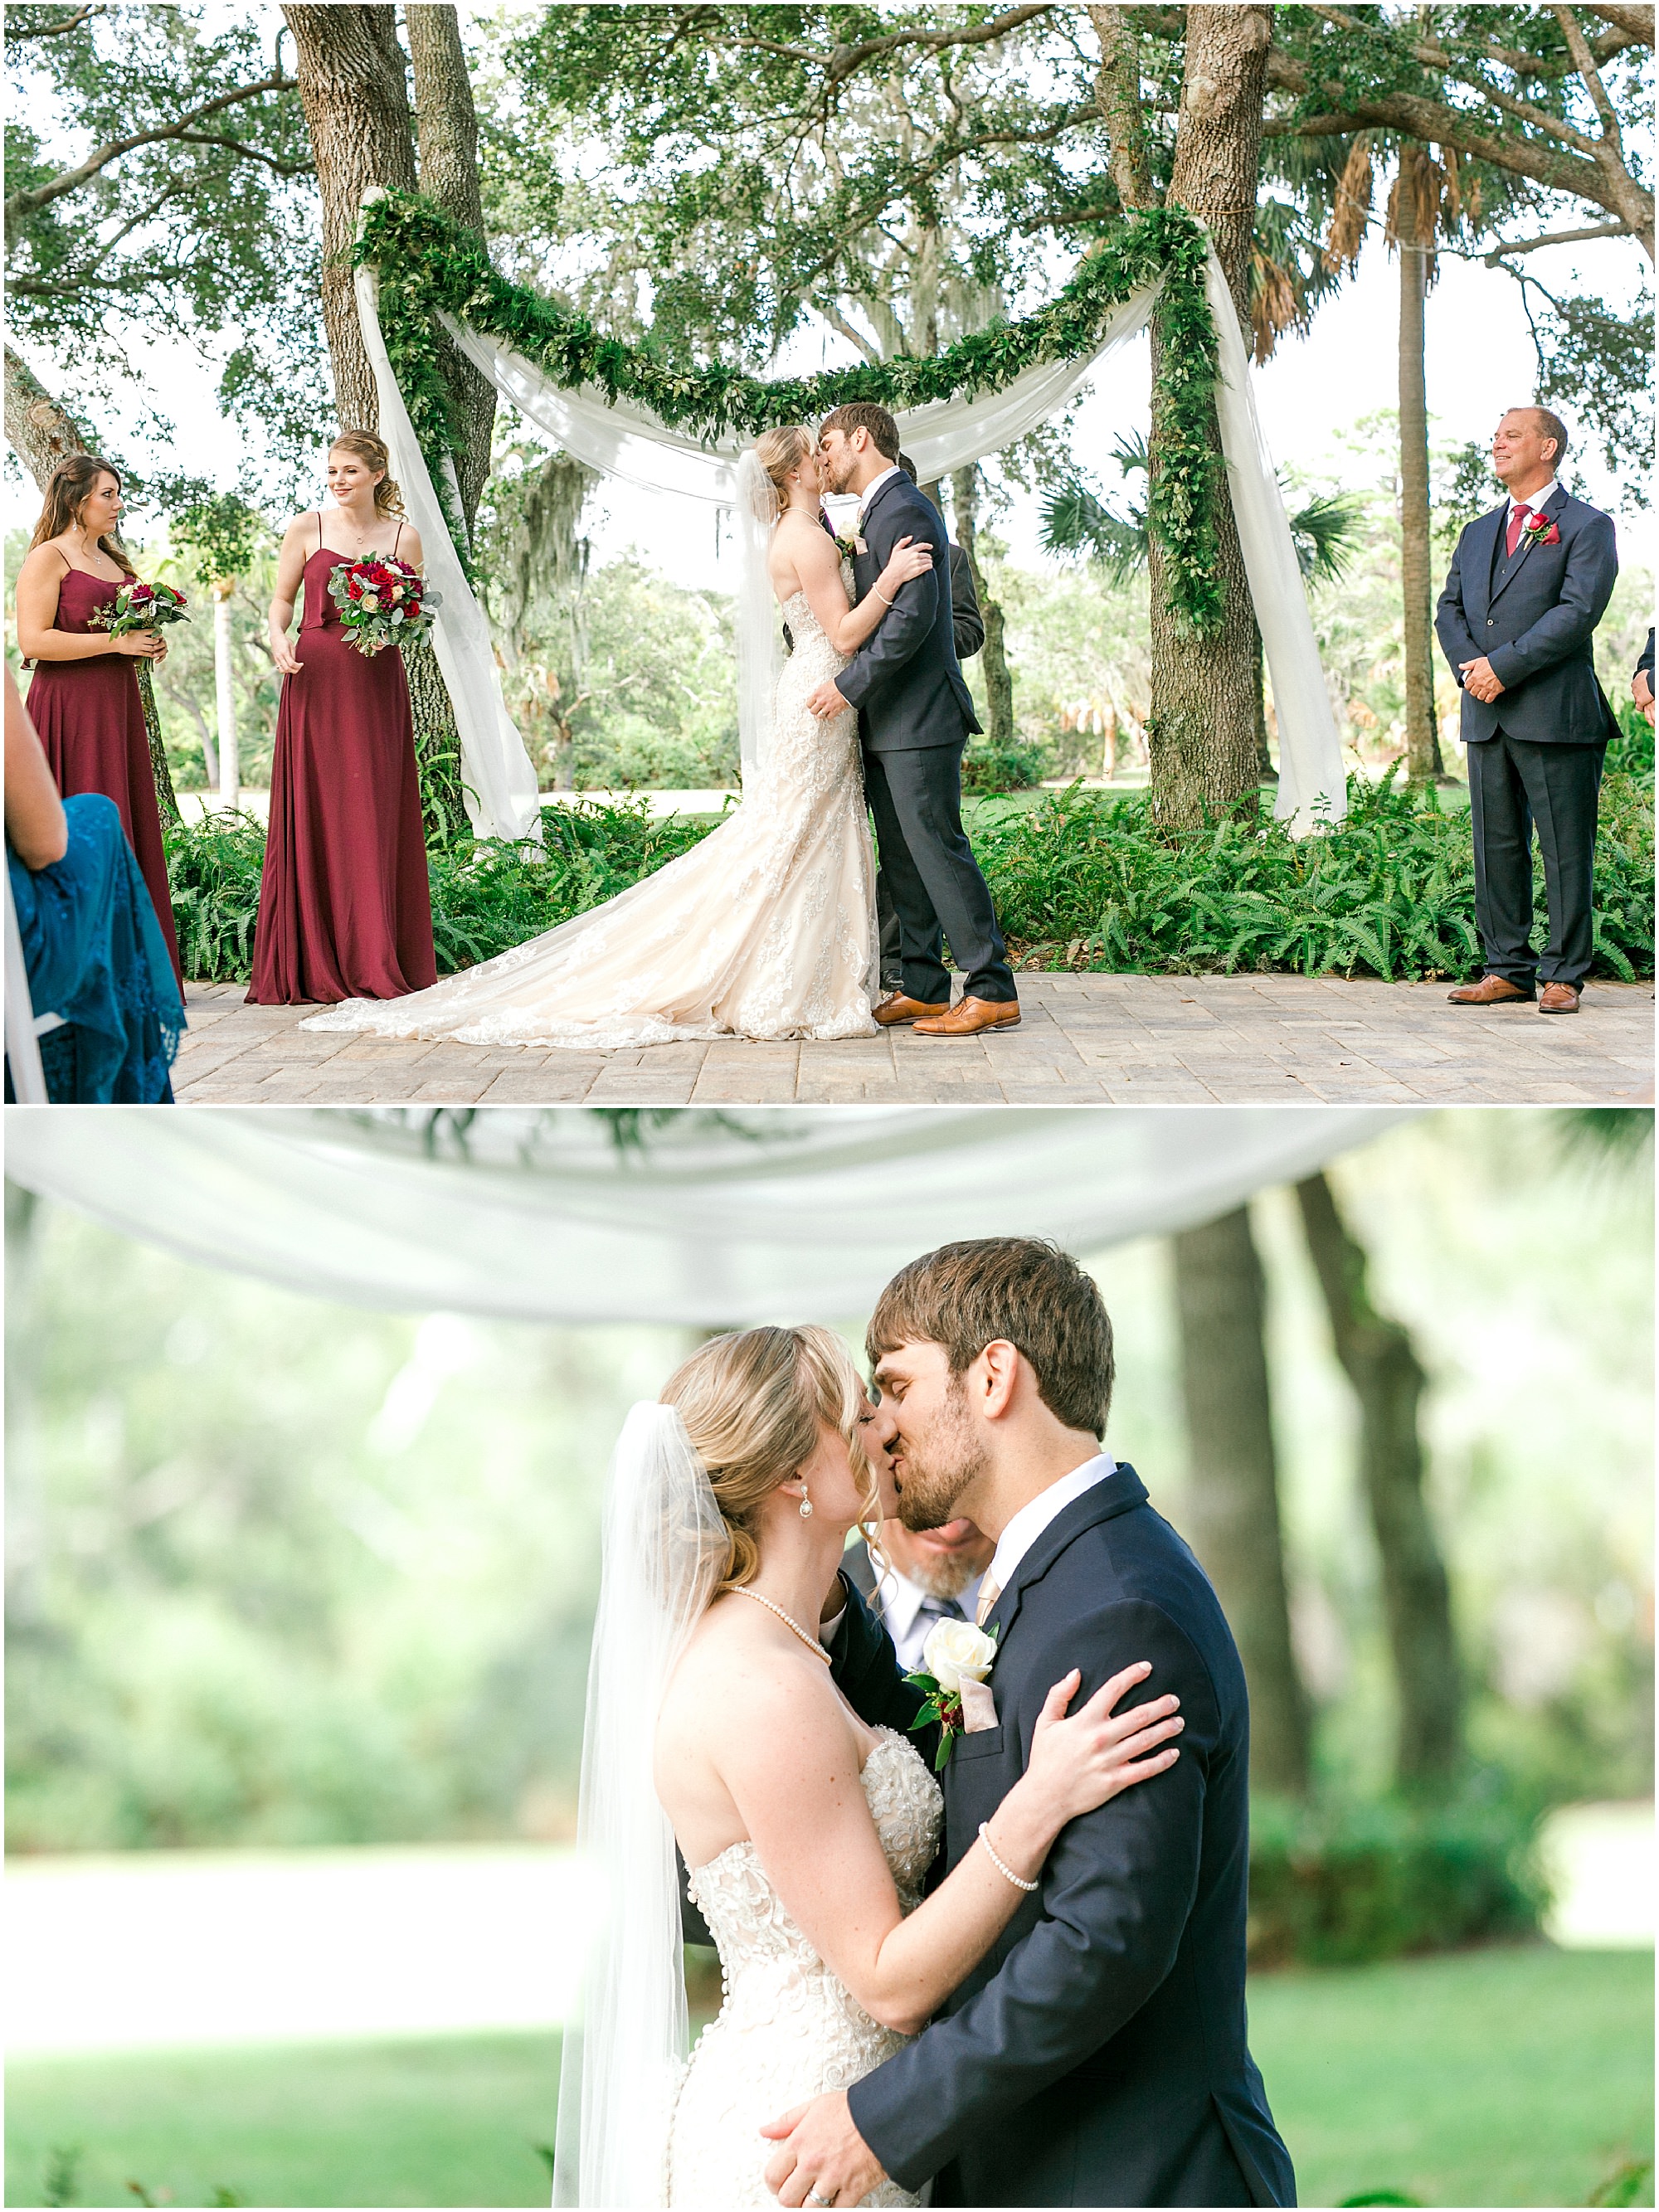 Newlywed couple kiss for the first time as a married couple.